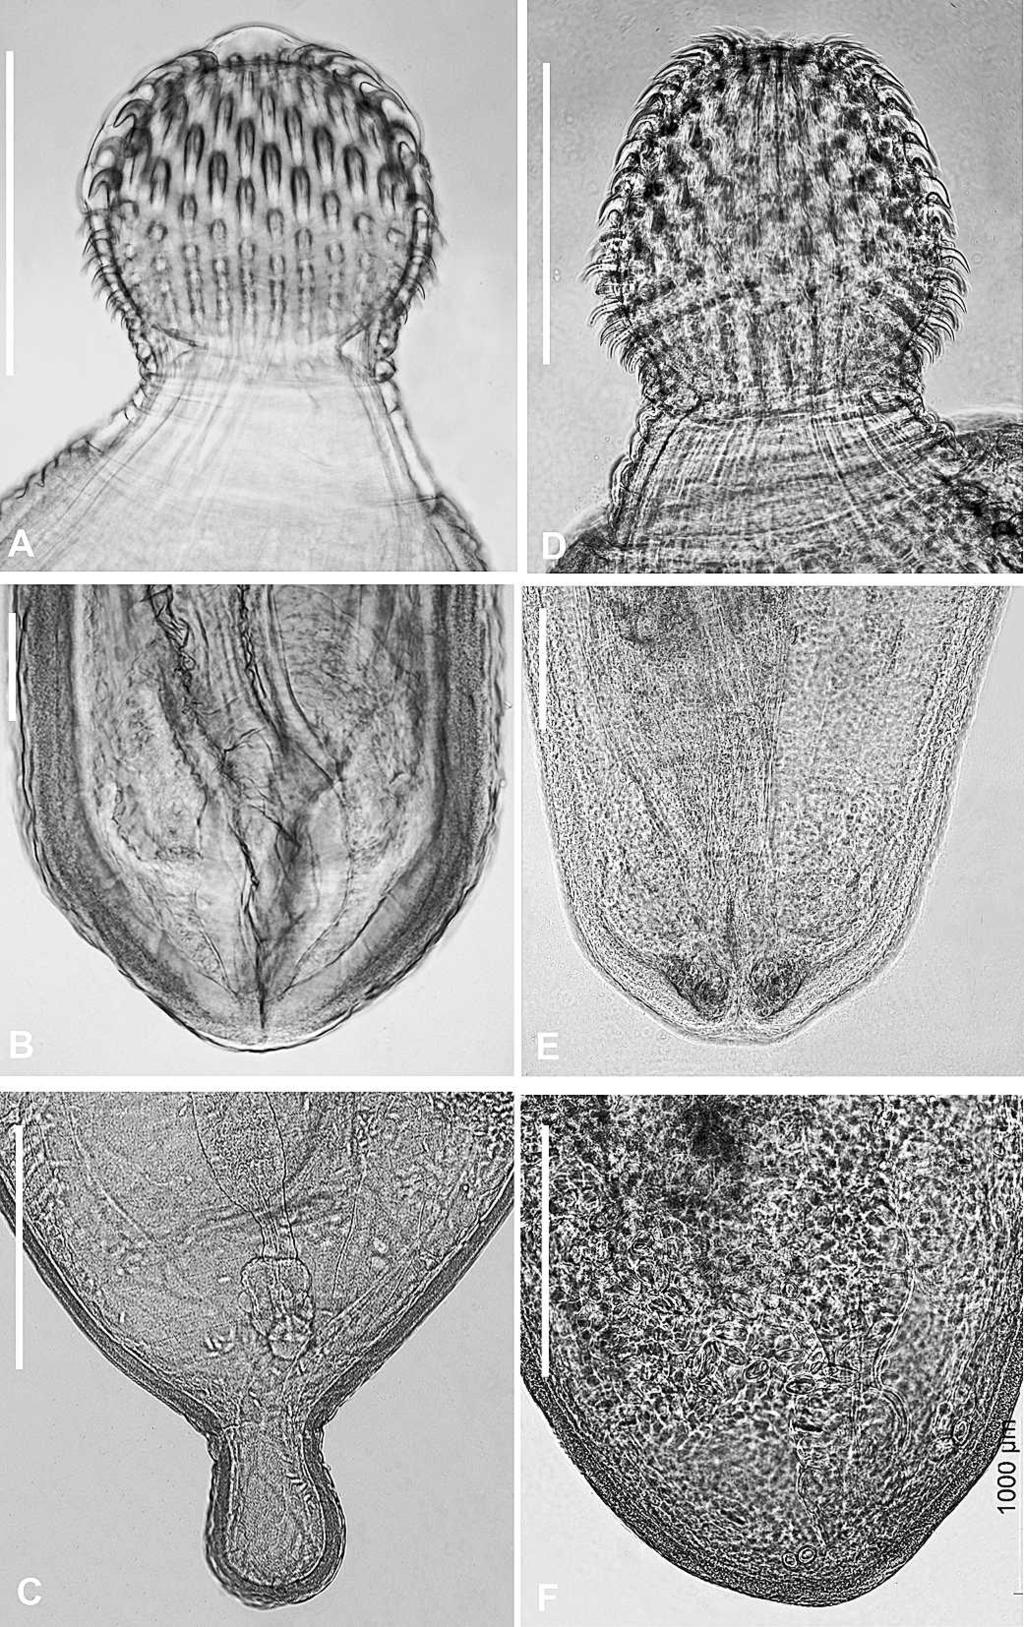 1180 THE JOURNAL OF PARASITOLOGY, VOL. 98, NO. 6, DECEMBER 2012 FIGURE 4. (A C) Porrorchis kinsellai n. sp. (A) Proboscis. (B) Male, posterior end.